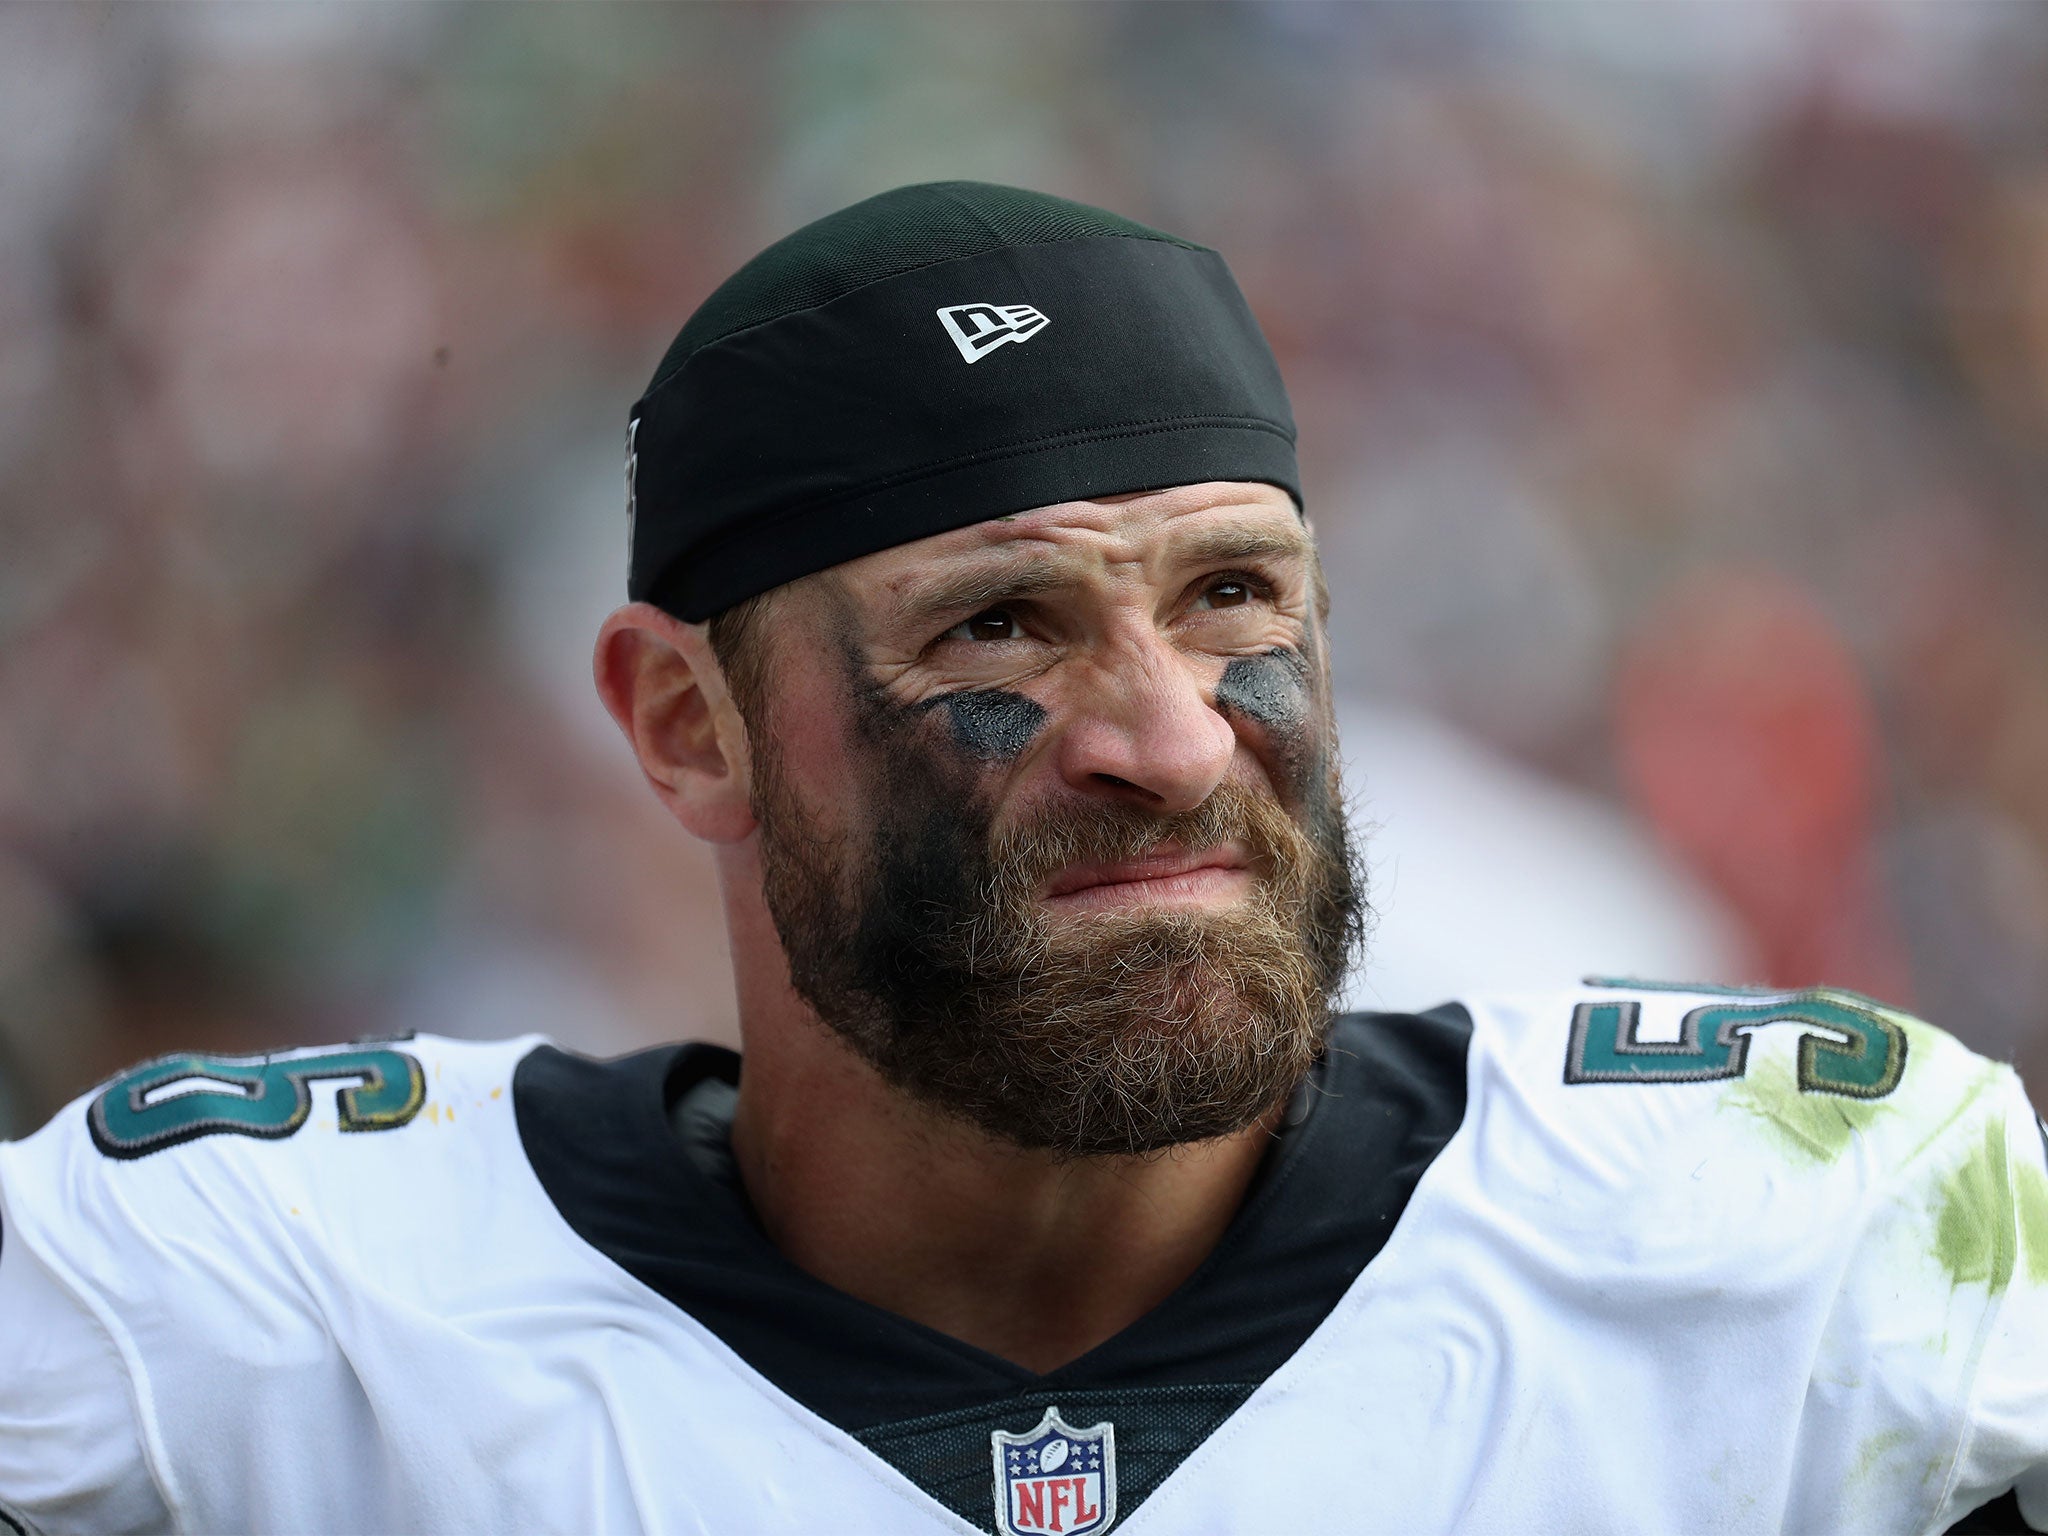 Chris Long of the Philadelphia Eagles has donated his entire season's pay to good causes